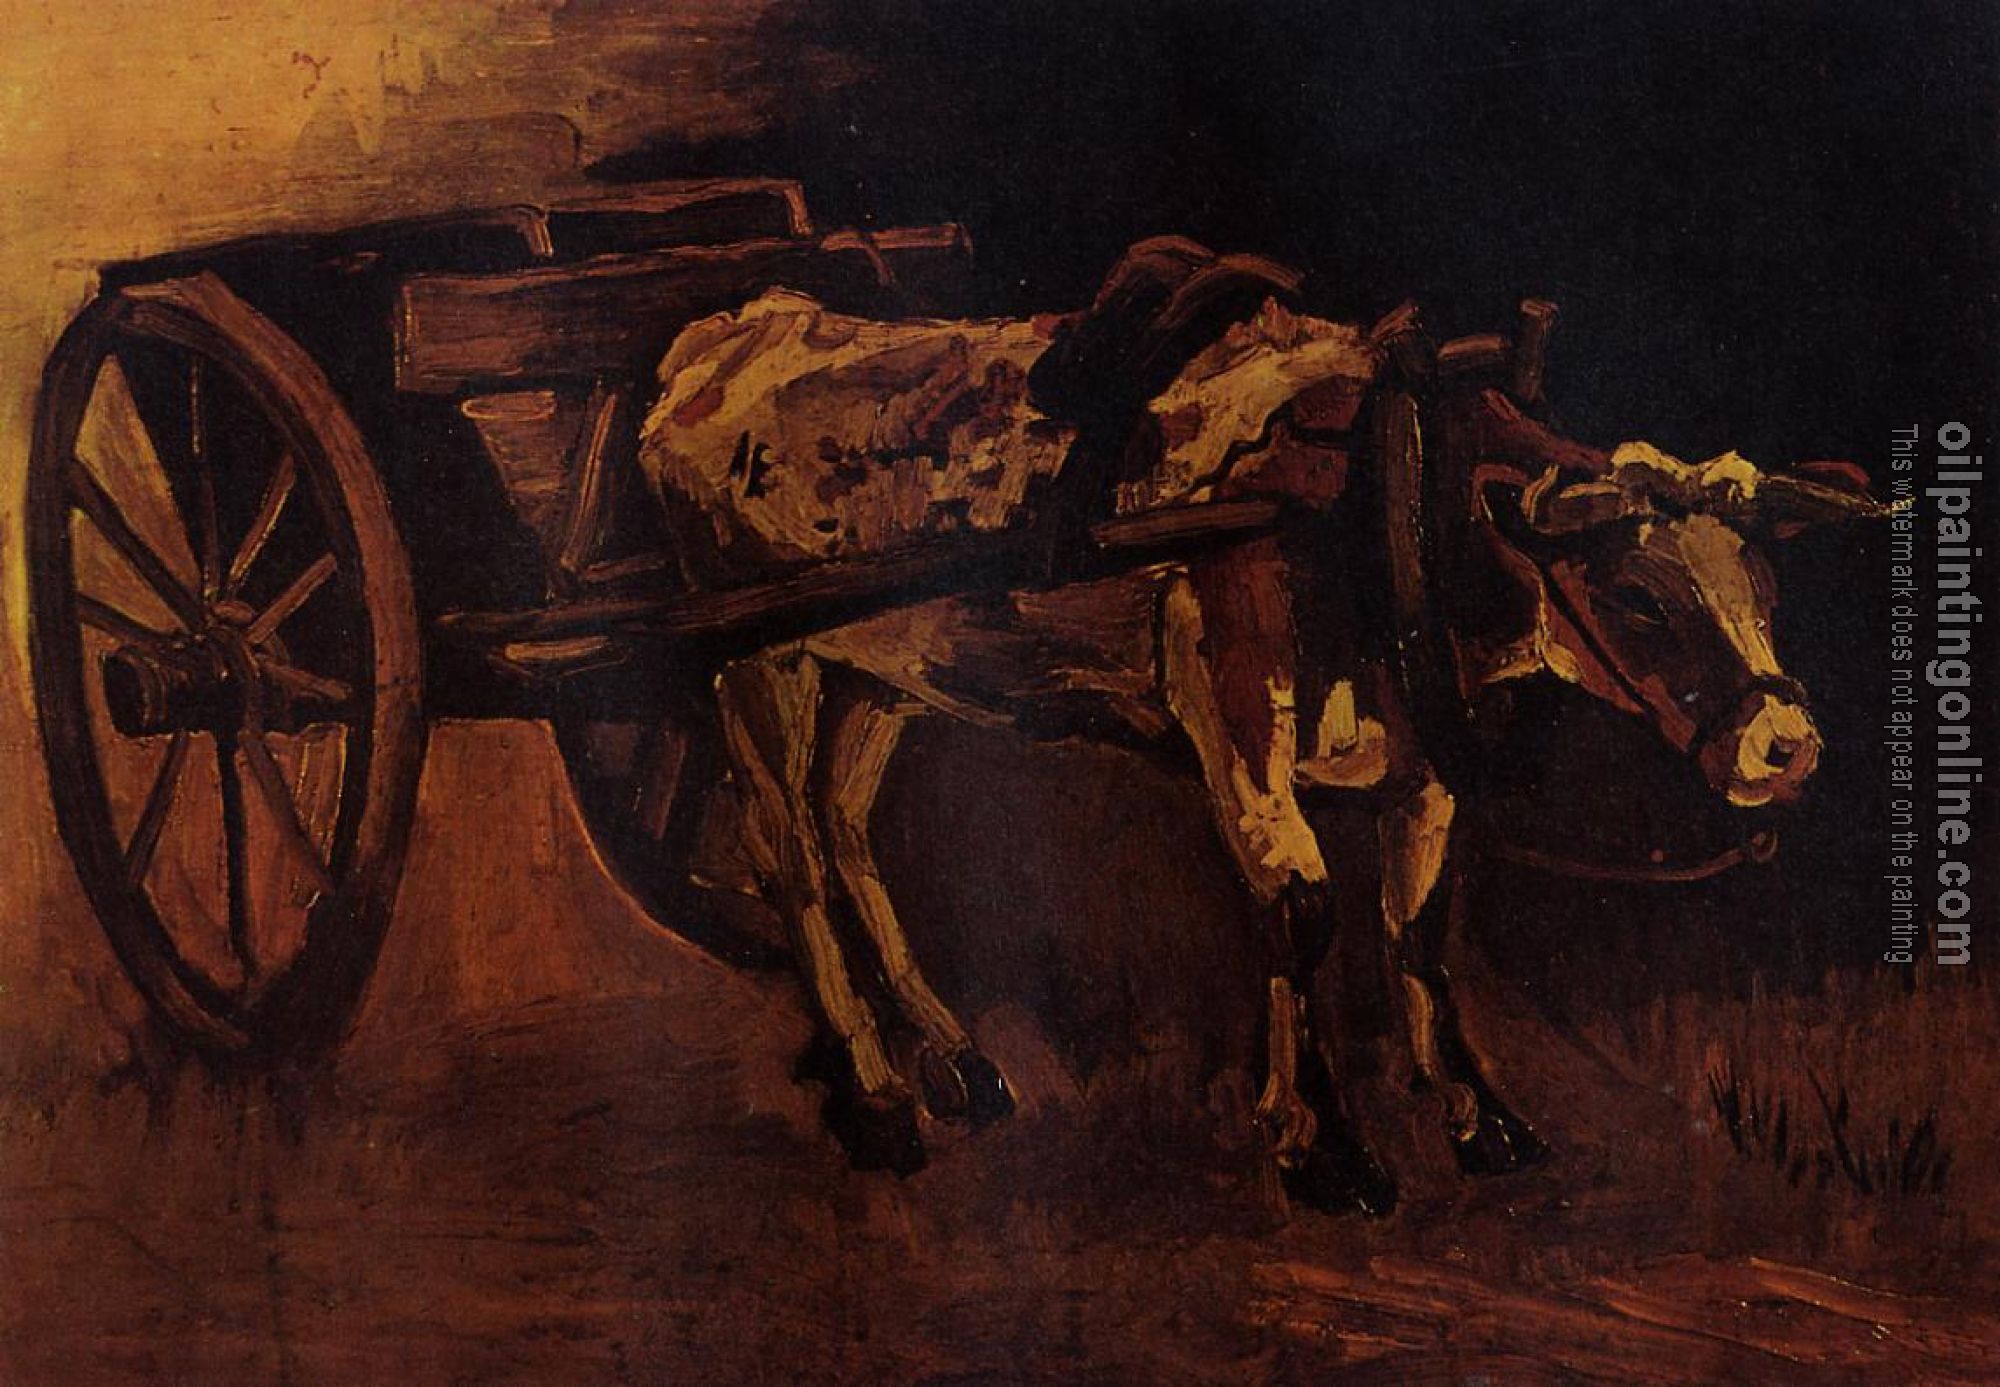 Gogh, Vincent van - Cart with Red and White Ox